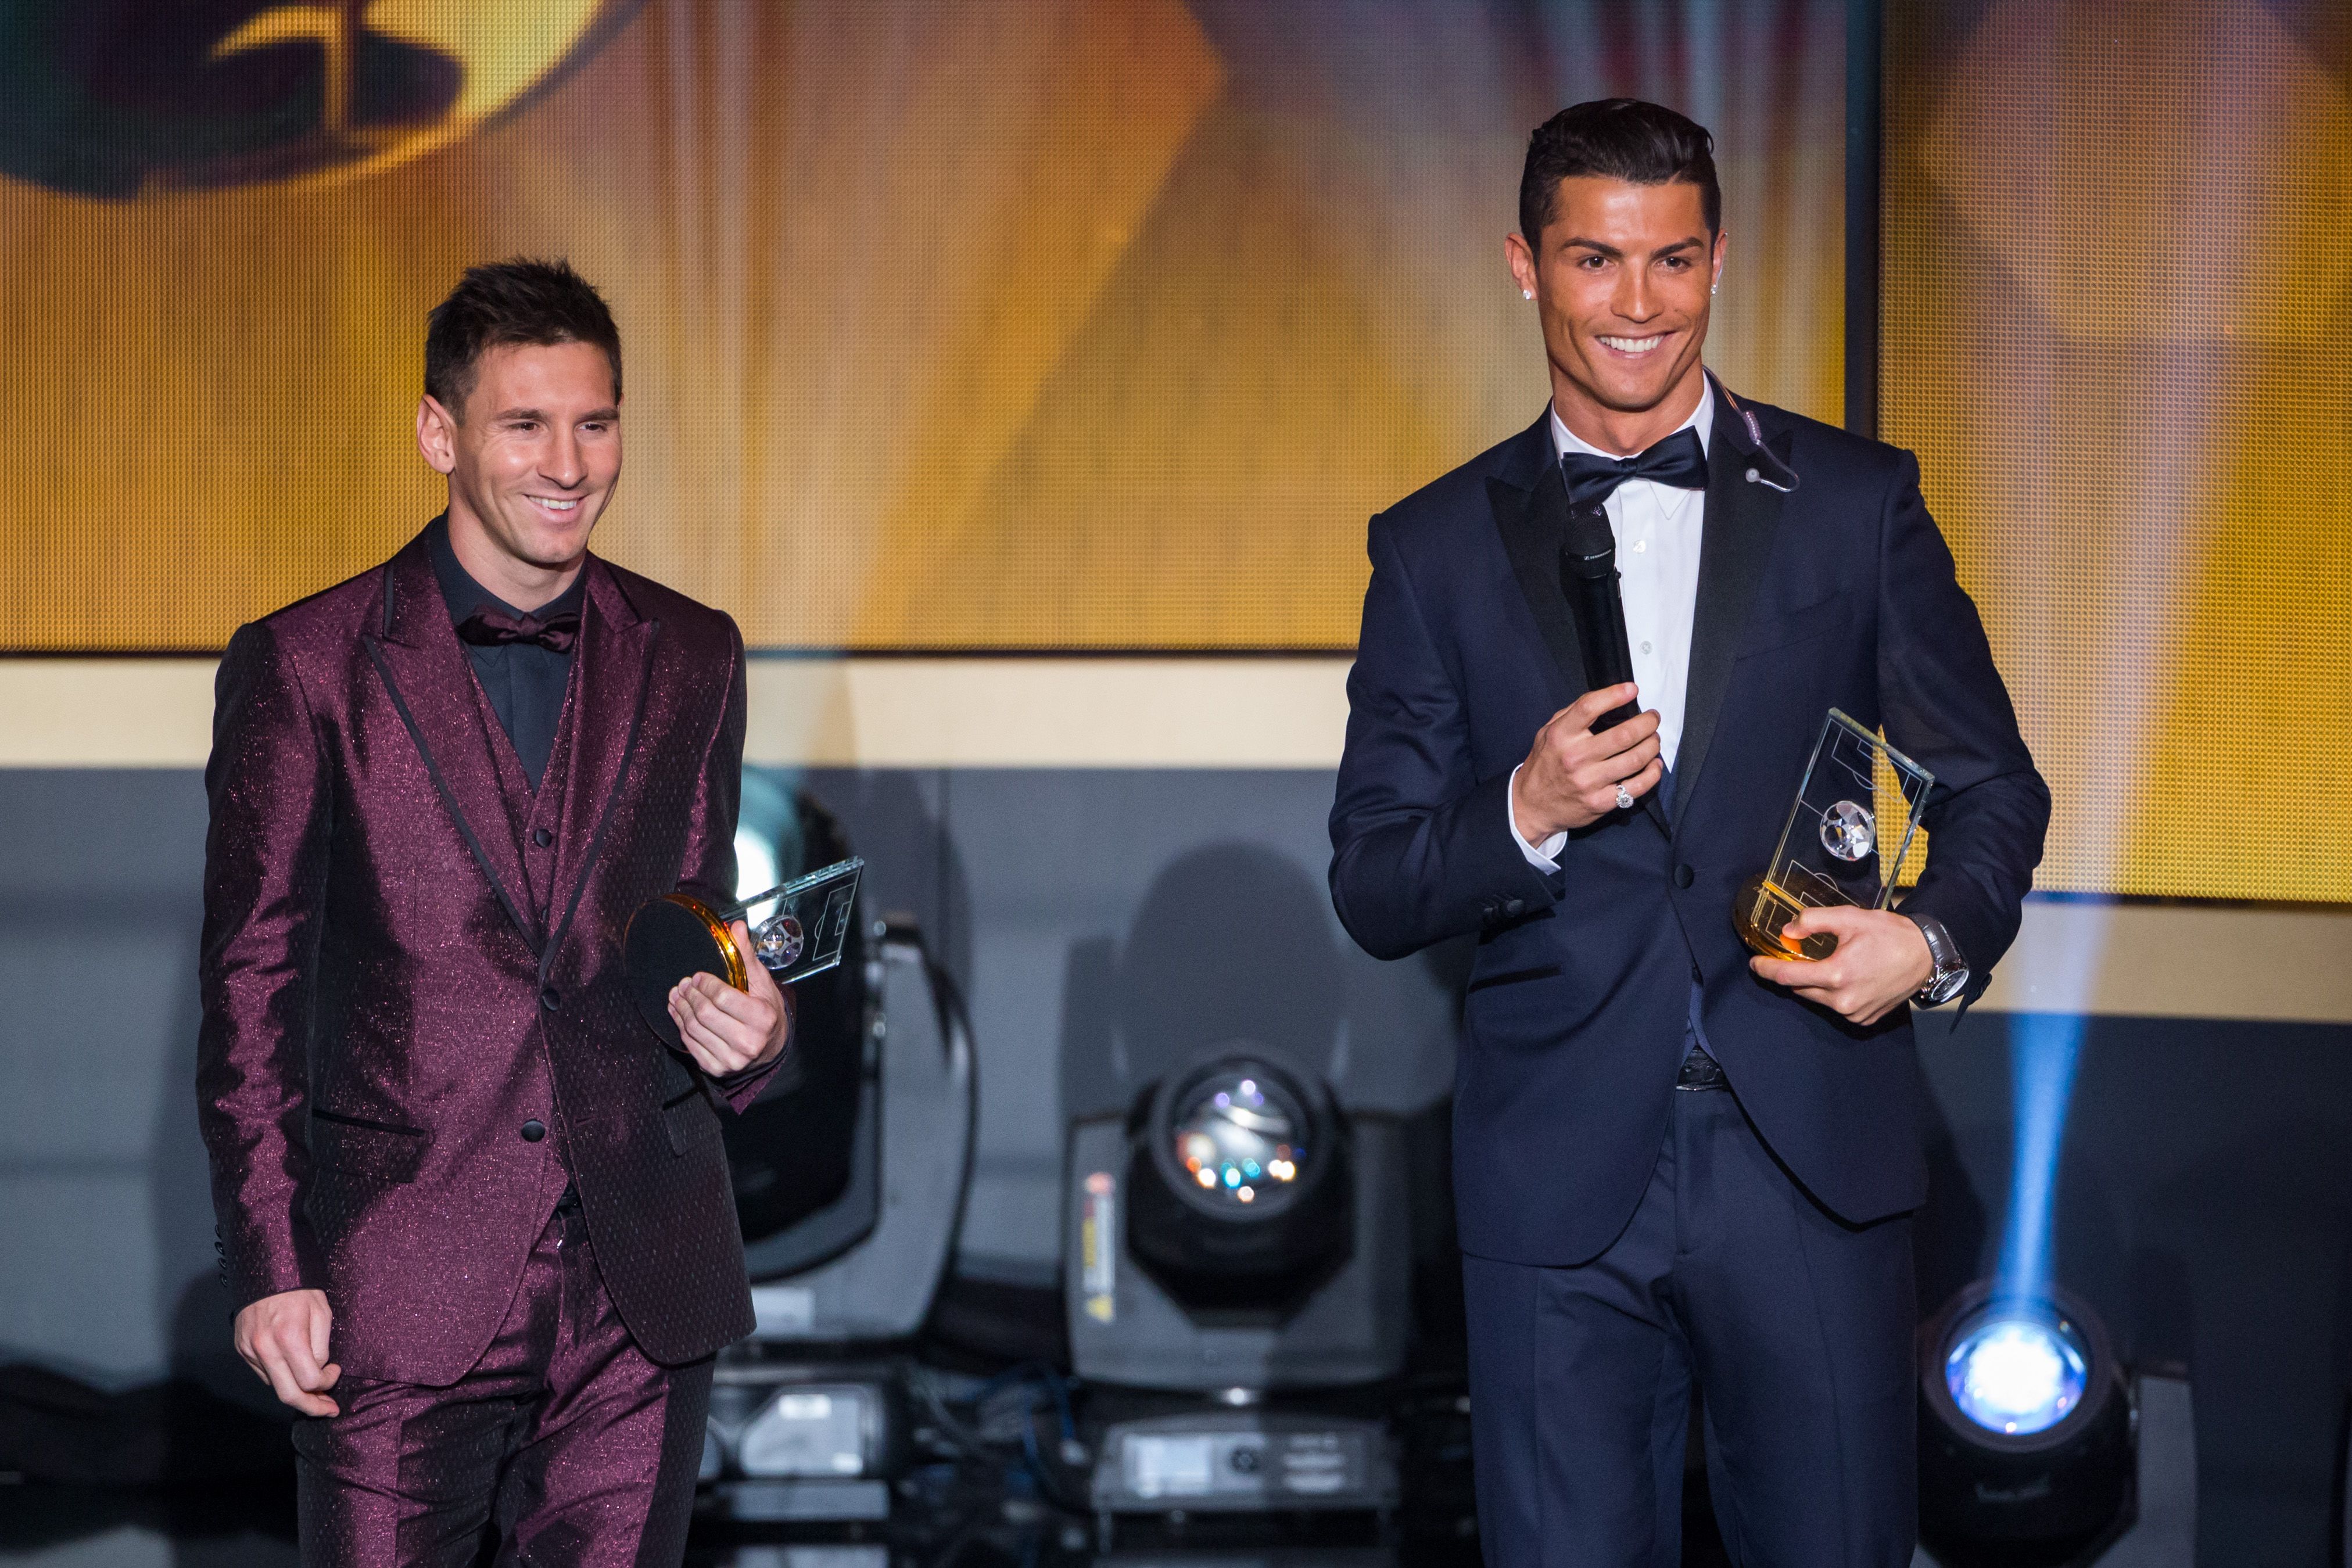 Lionel Messi's arrival in MLS ends the era he shared with Cristiano Ronaldo  - AS USA